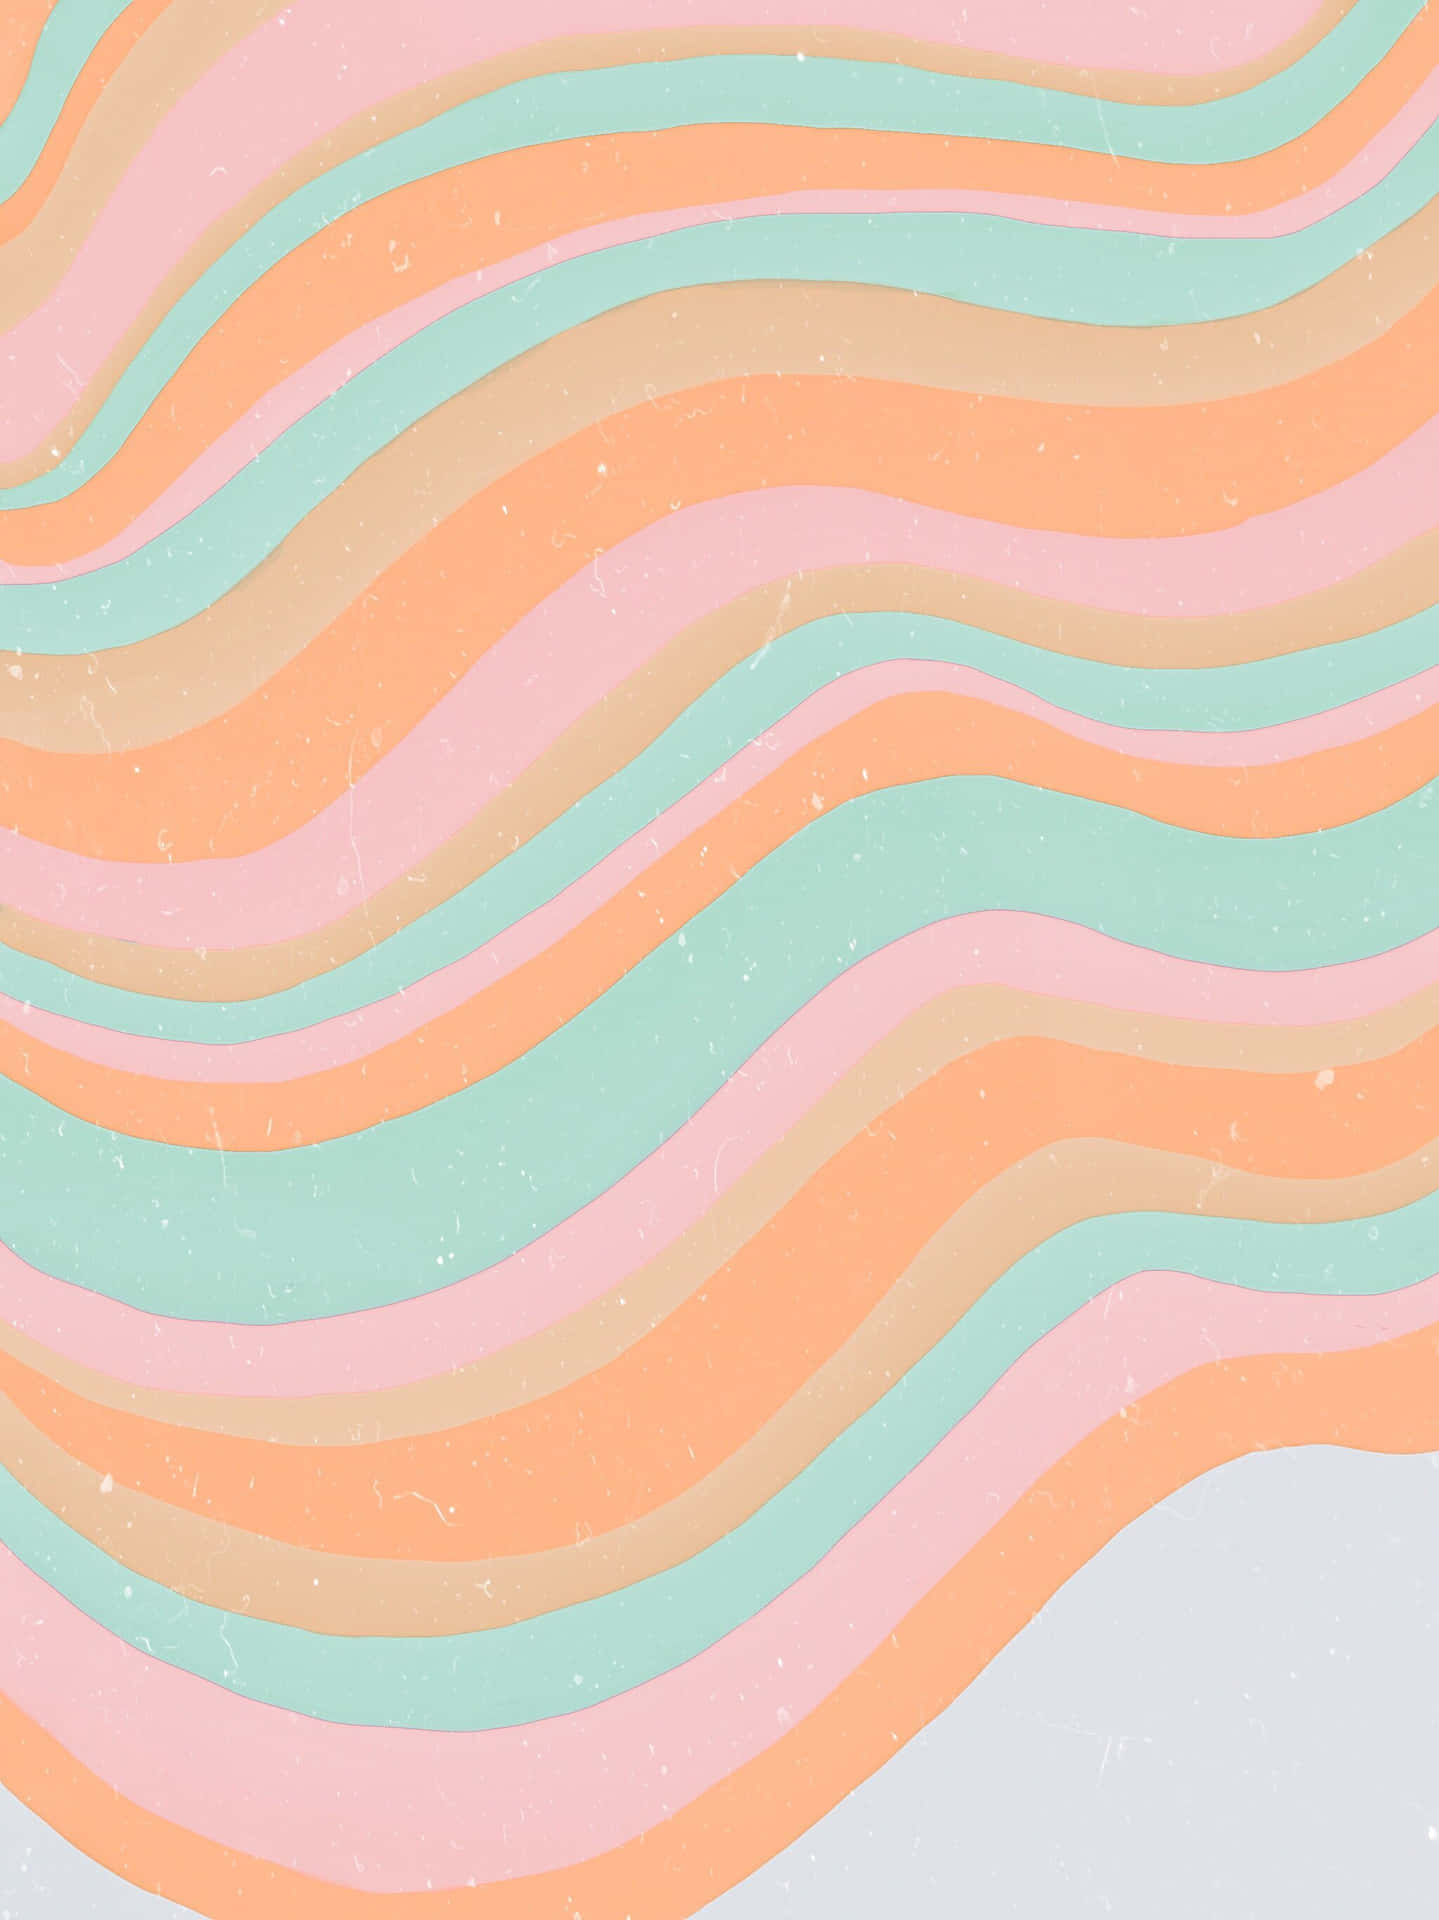 70's Groovy Background Wavy Blue And Pastel Colors